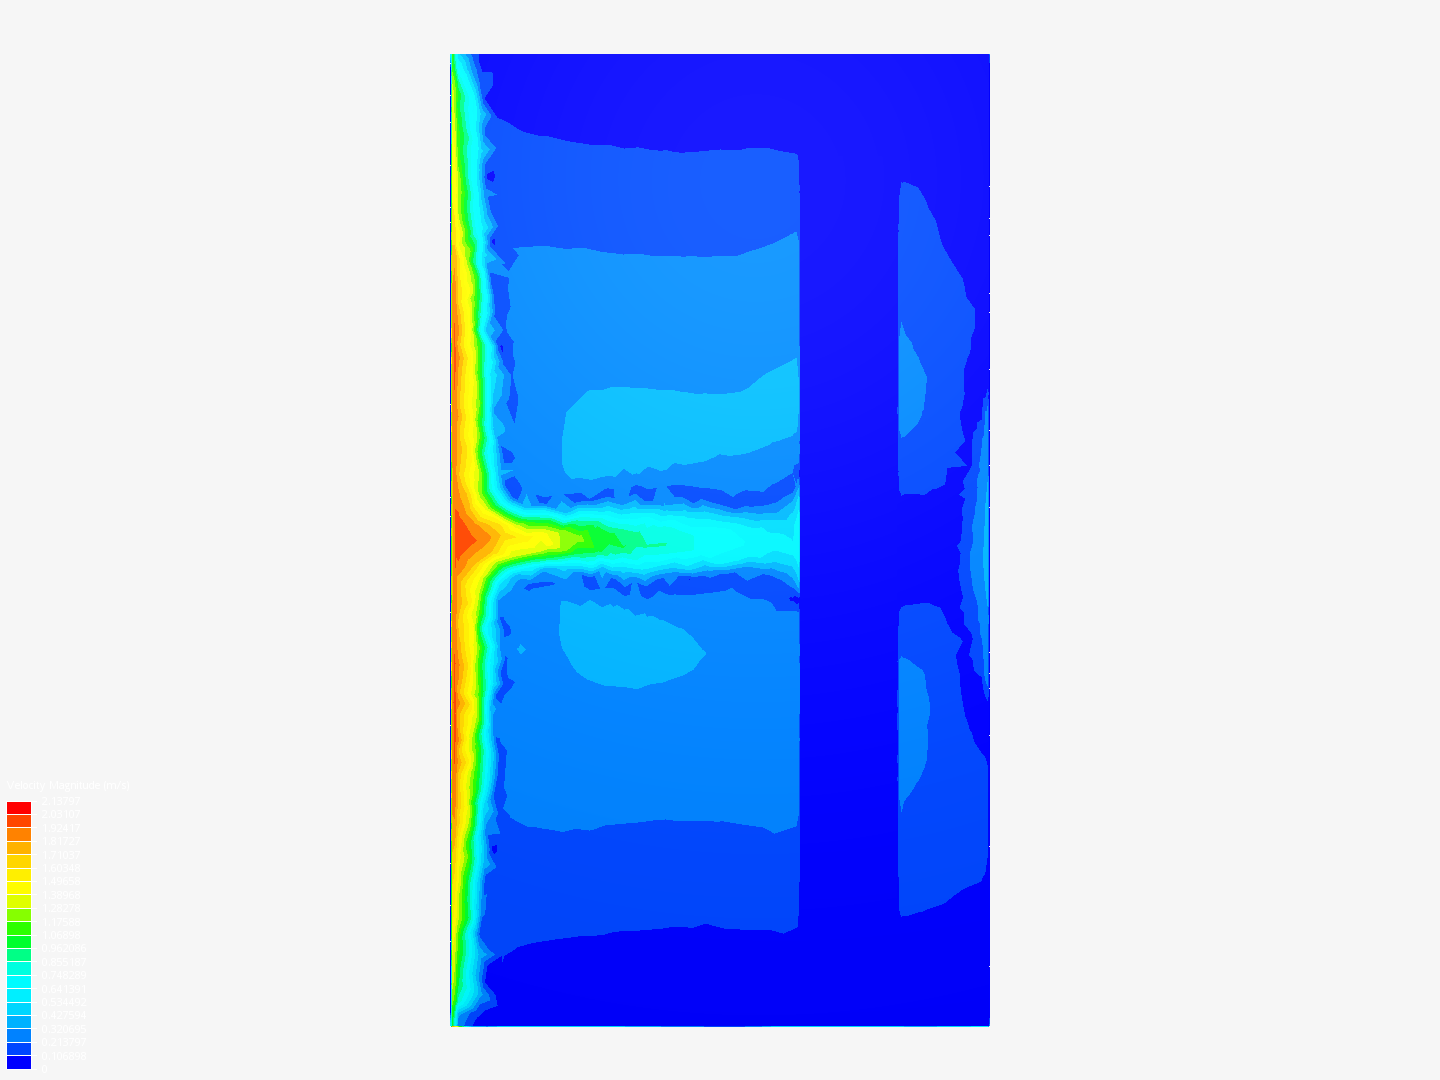 Server Room Cooling with CFD Analysis  - Copy image